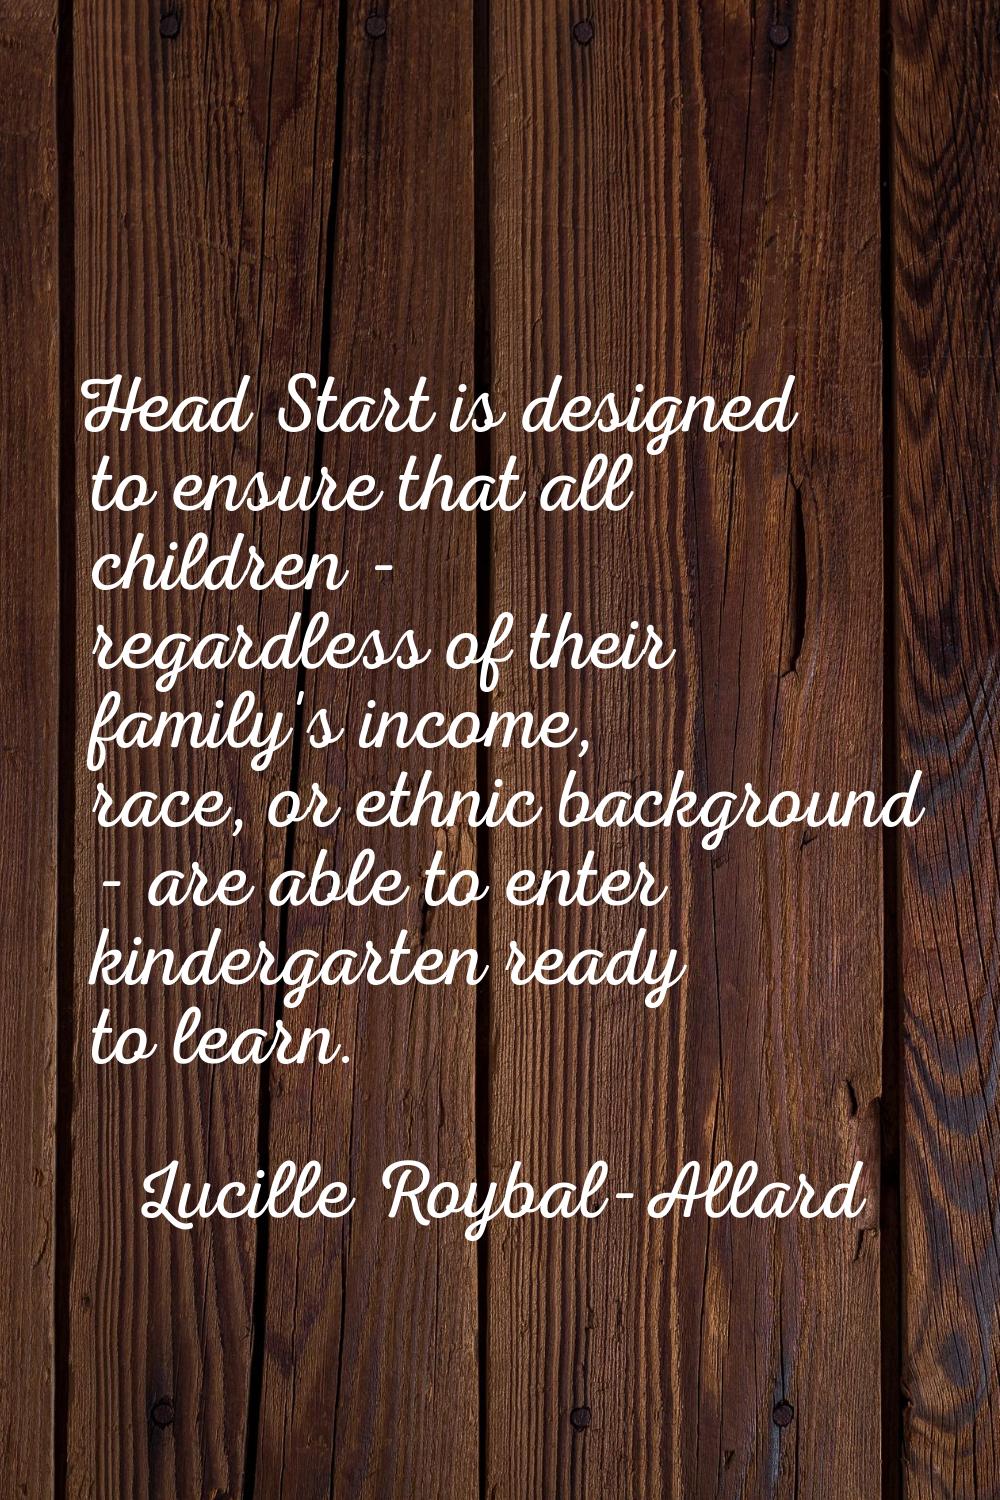 Head Start is designed to ensure that all children - regardless of their family's income, race, or 